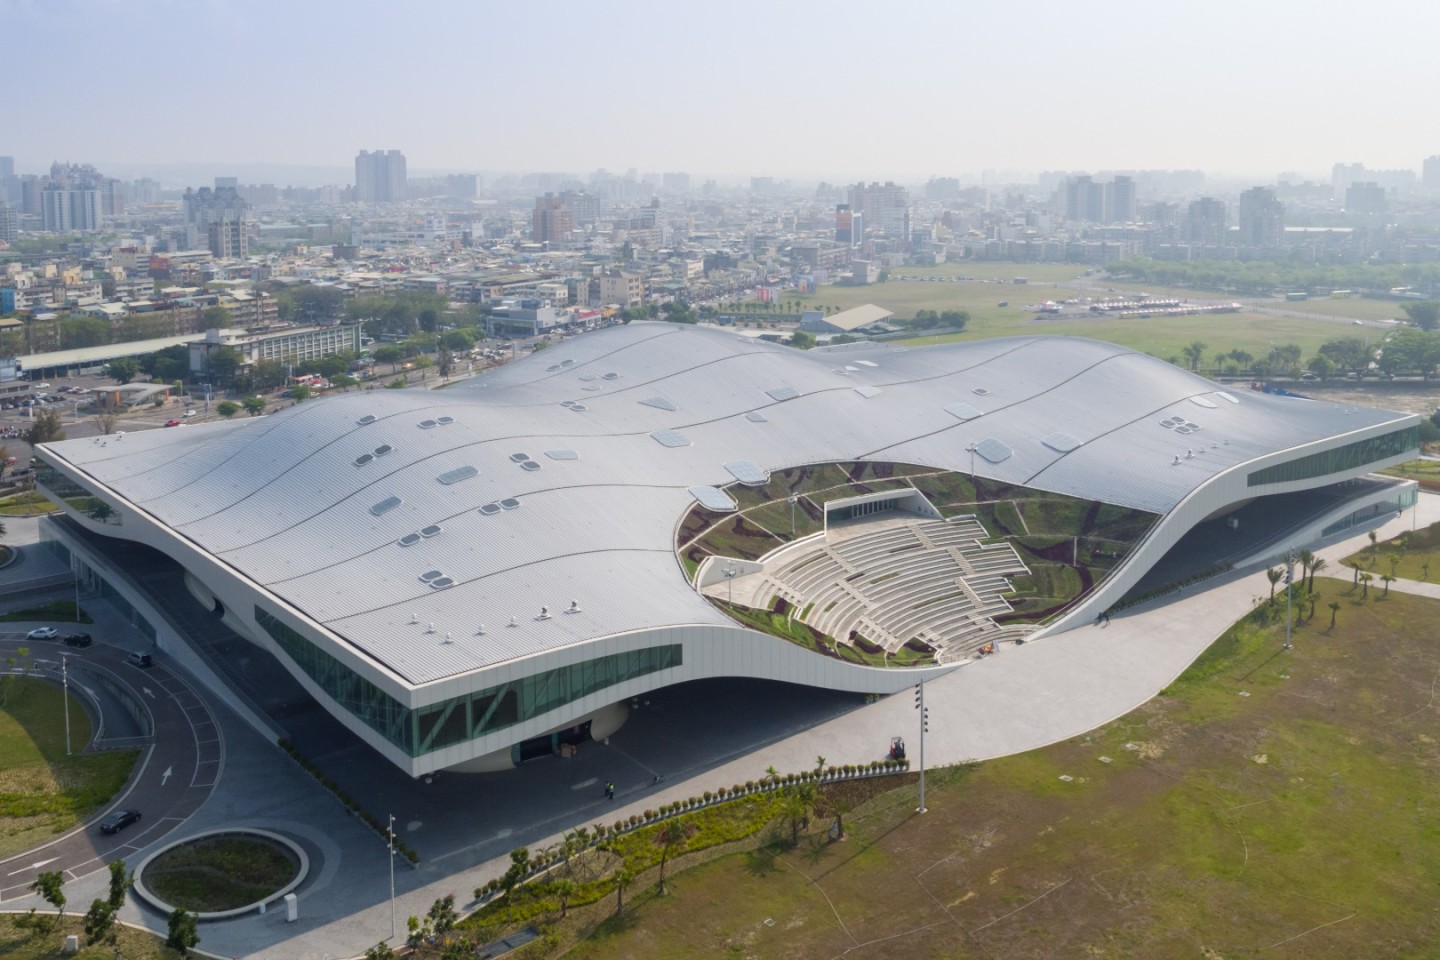 The National Kaohsiung Centre for the Arts in Taiwan houses a huge public plaza under its undulating roof